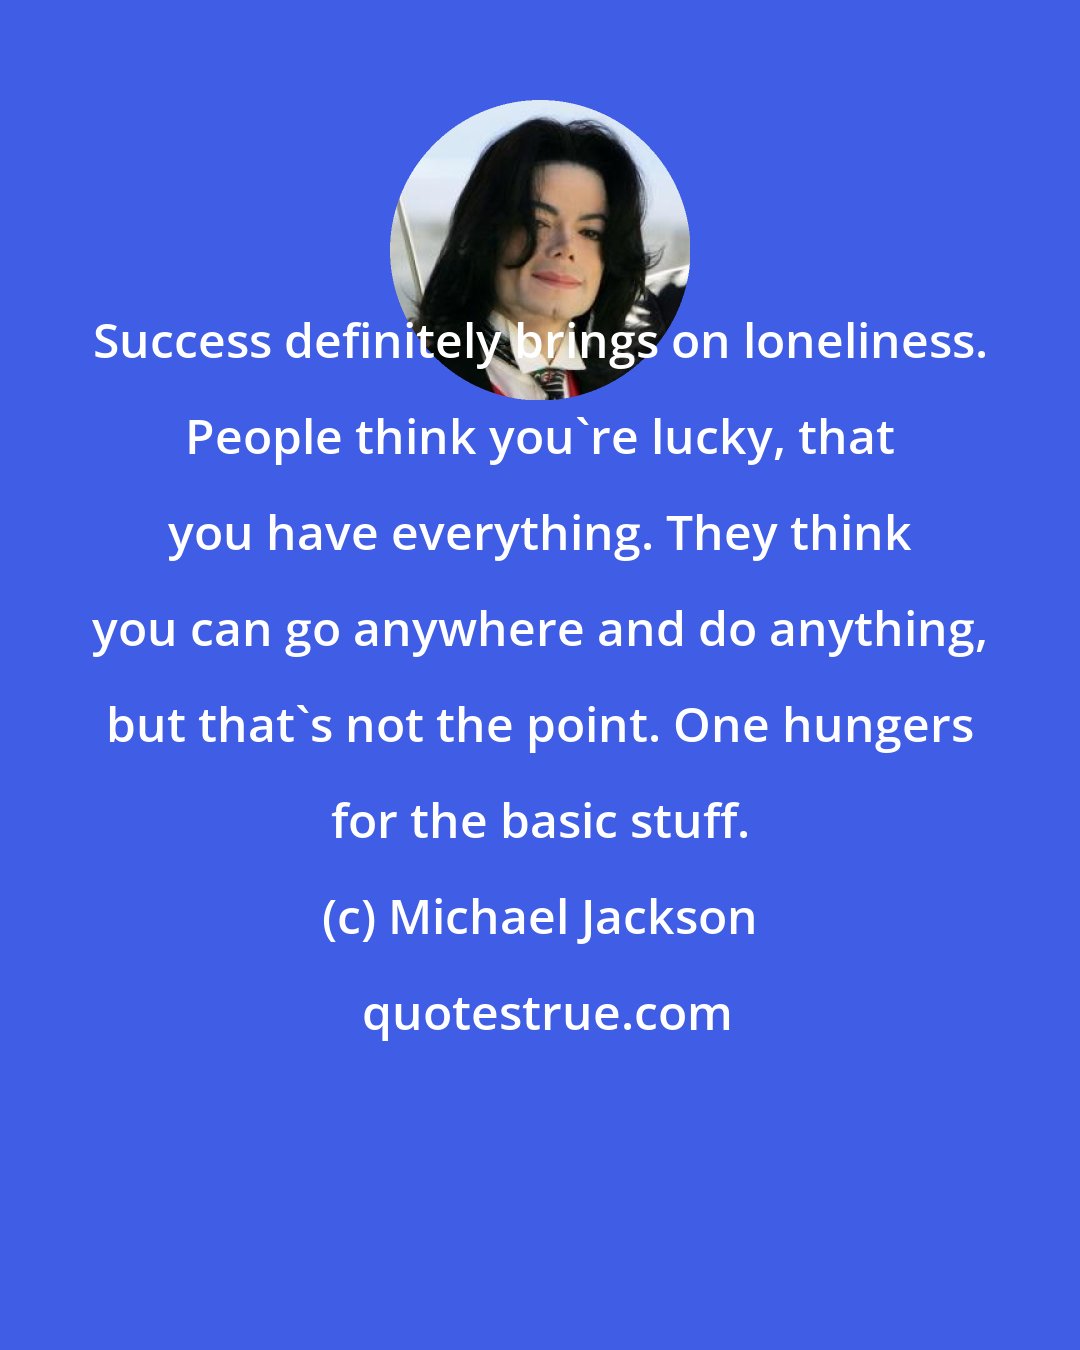 Michael Jackson: Success definitely brings on loneliness. People think you're lucky, that you have everything. They think you can go anywhere and do anything, but that's not the point. One hungers for the basic stuff.